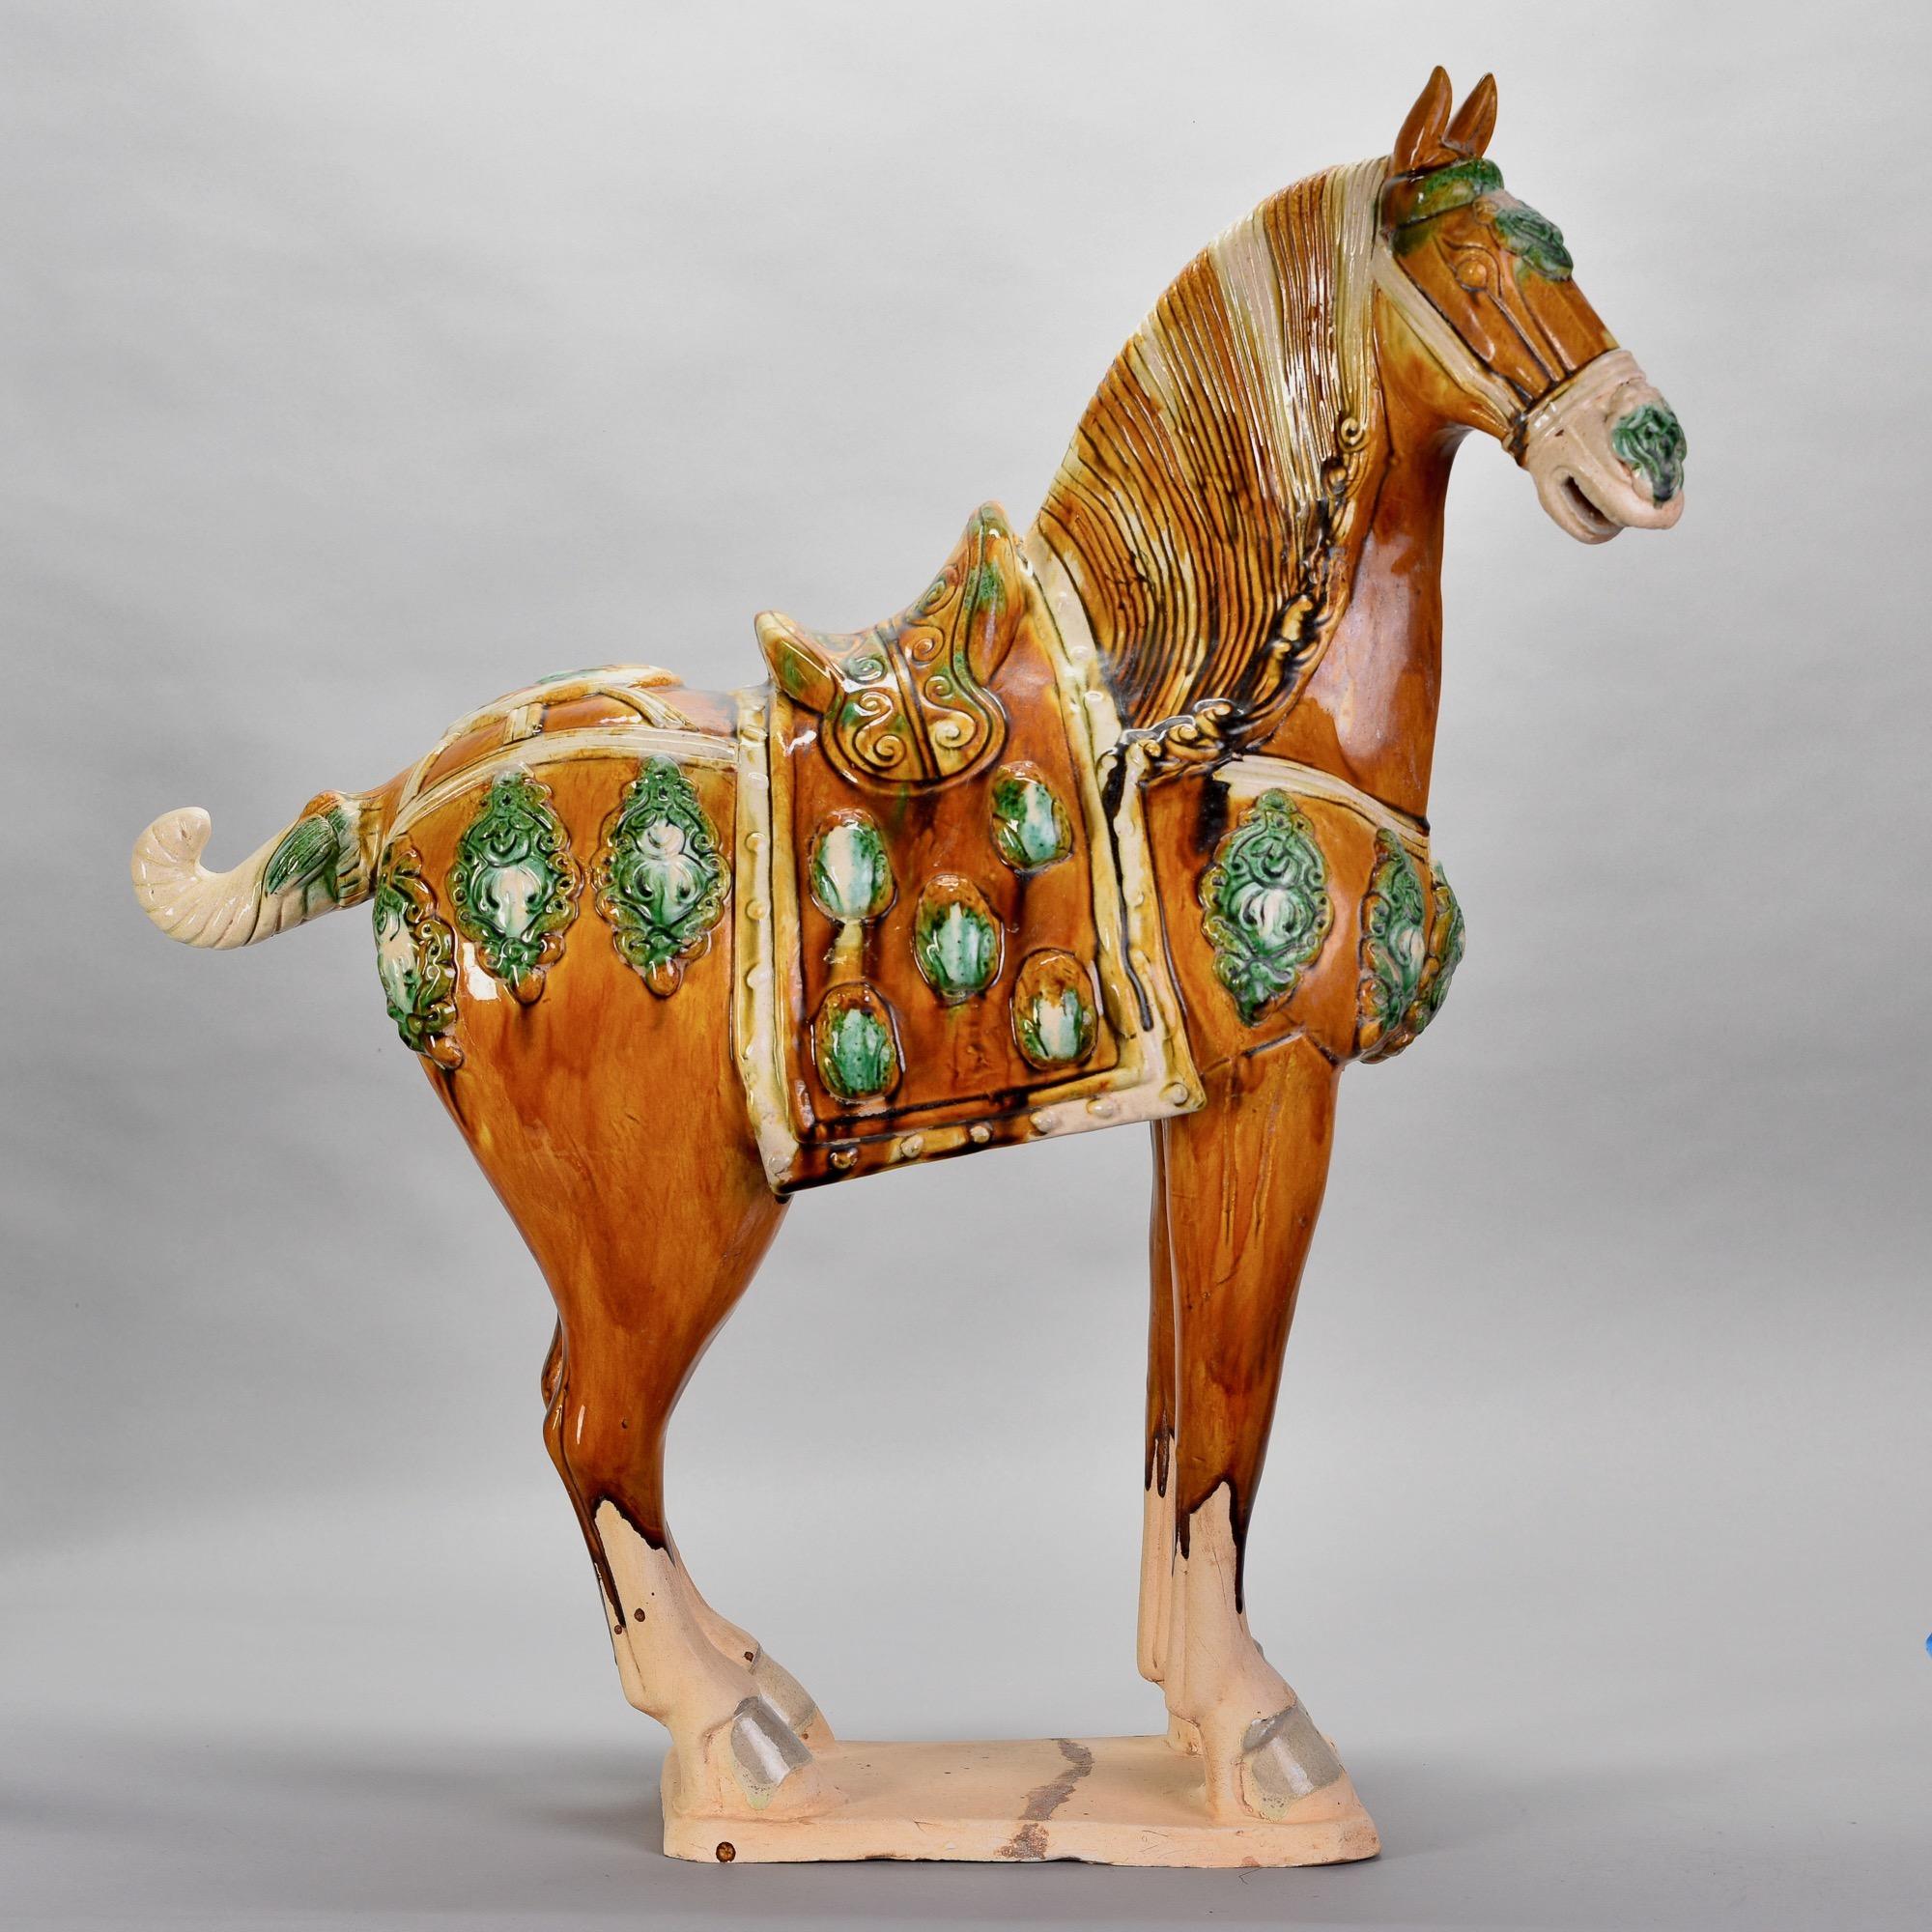 Circa 2010 Chinese ceramic Tang horse stands just under 28” tall. Colorful glaze in rich shades of amber, green and cream. Unknown maker. Very good preowned condition with no flaws found.